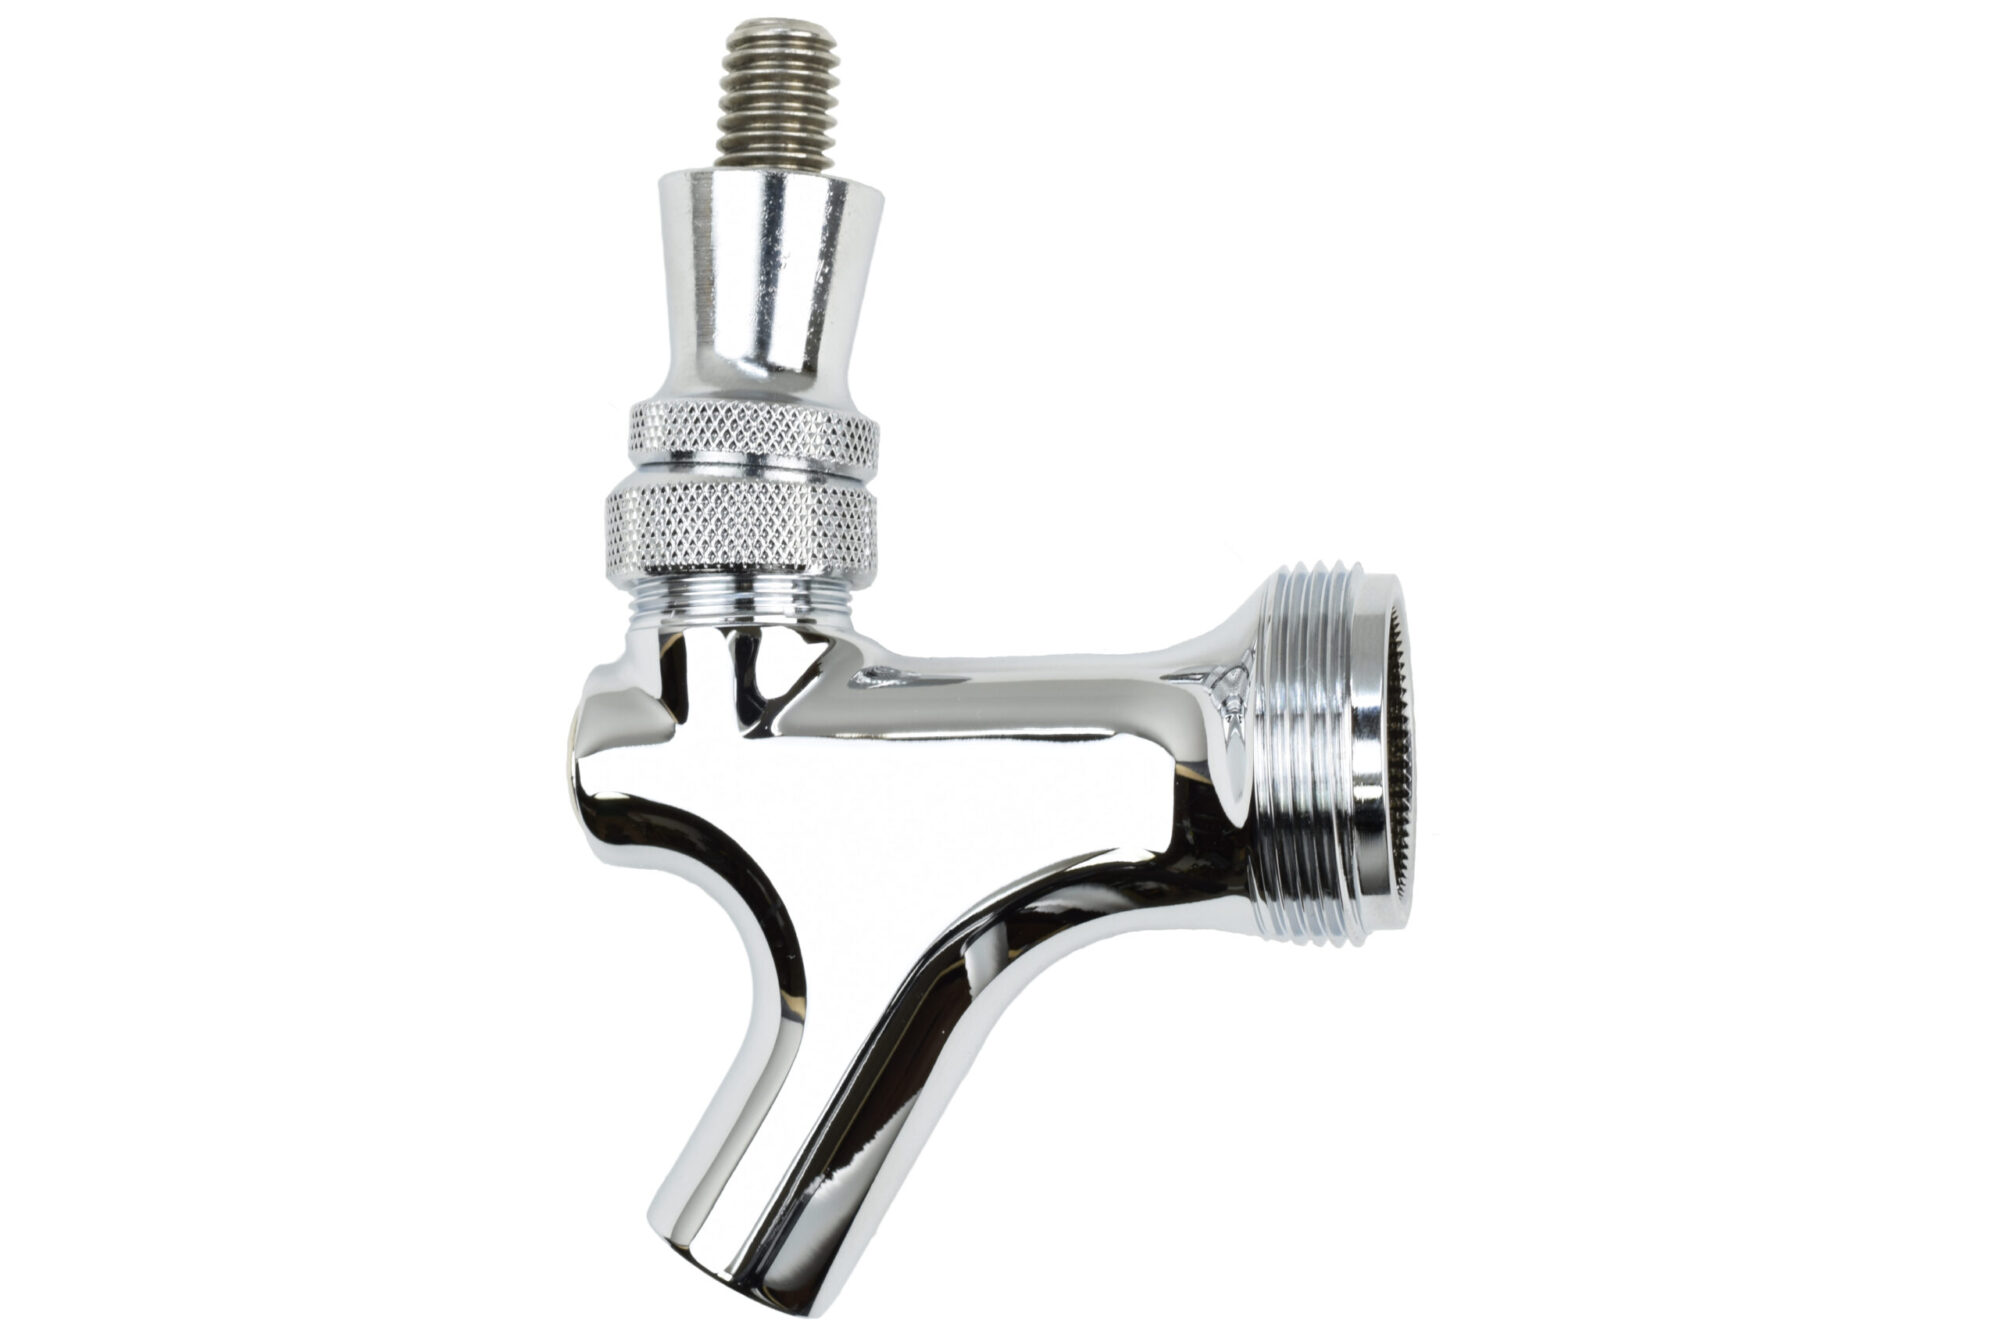 660BS Chrome Faucet with Stainless Steel Lever